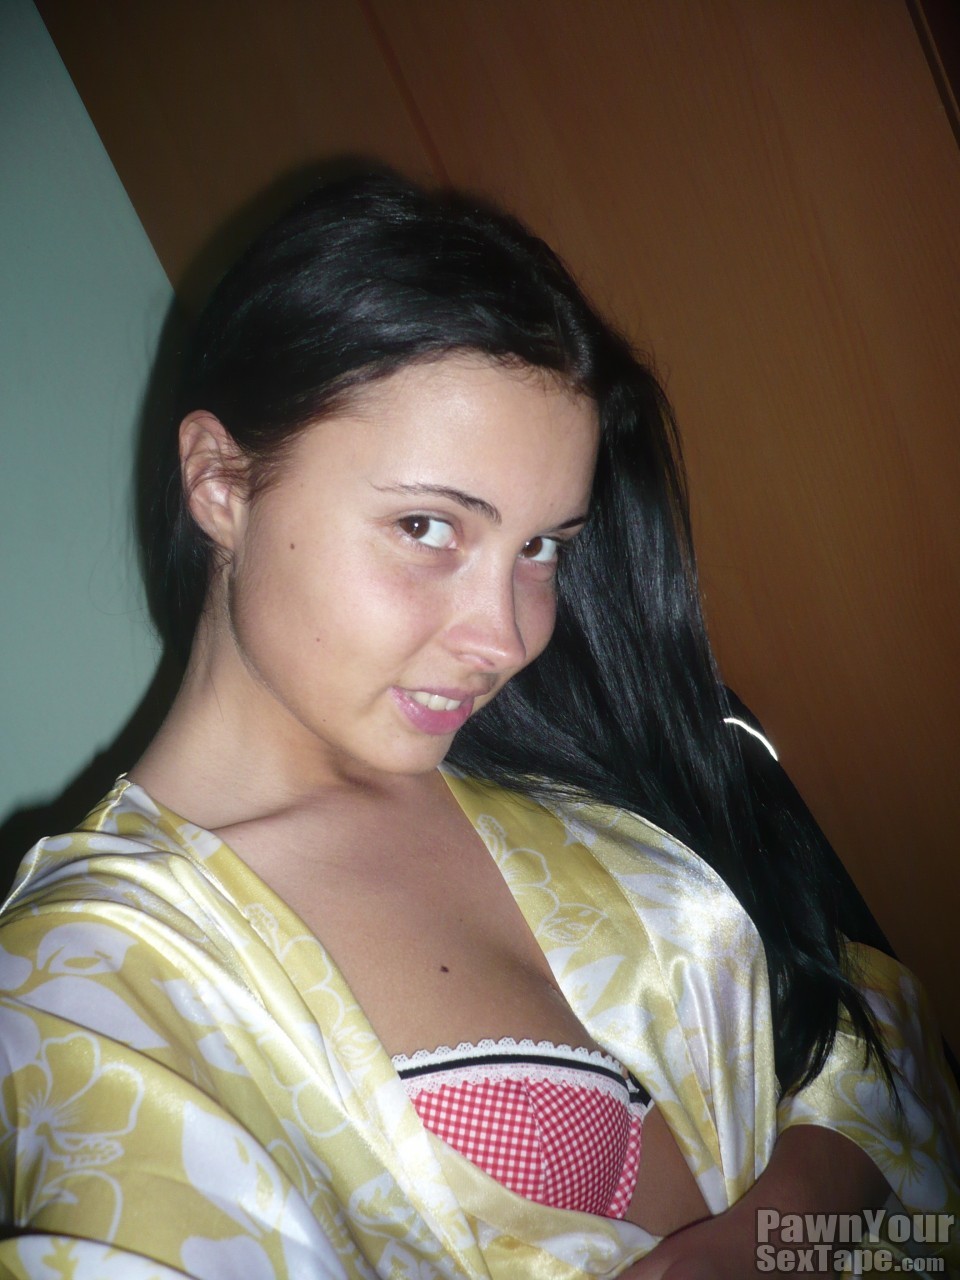 Cute 18 y.o. Sandra gets naked for her BF as he snaps hot naked home pics of her #79350822